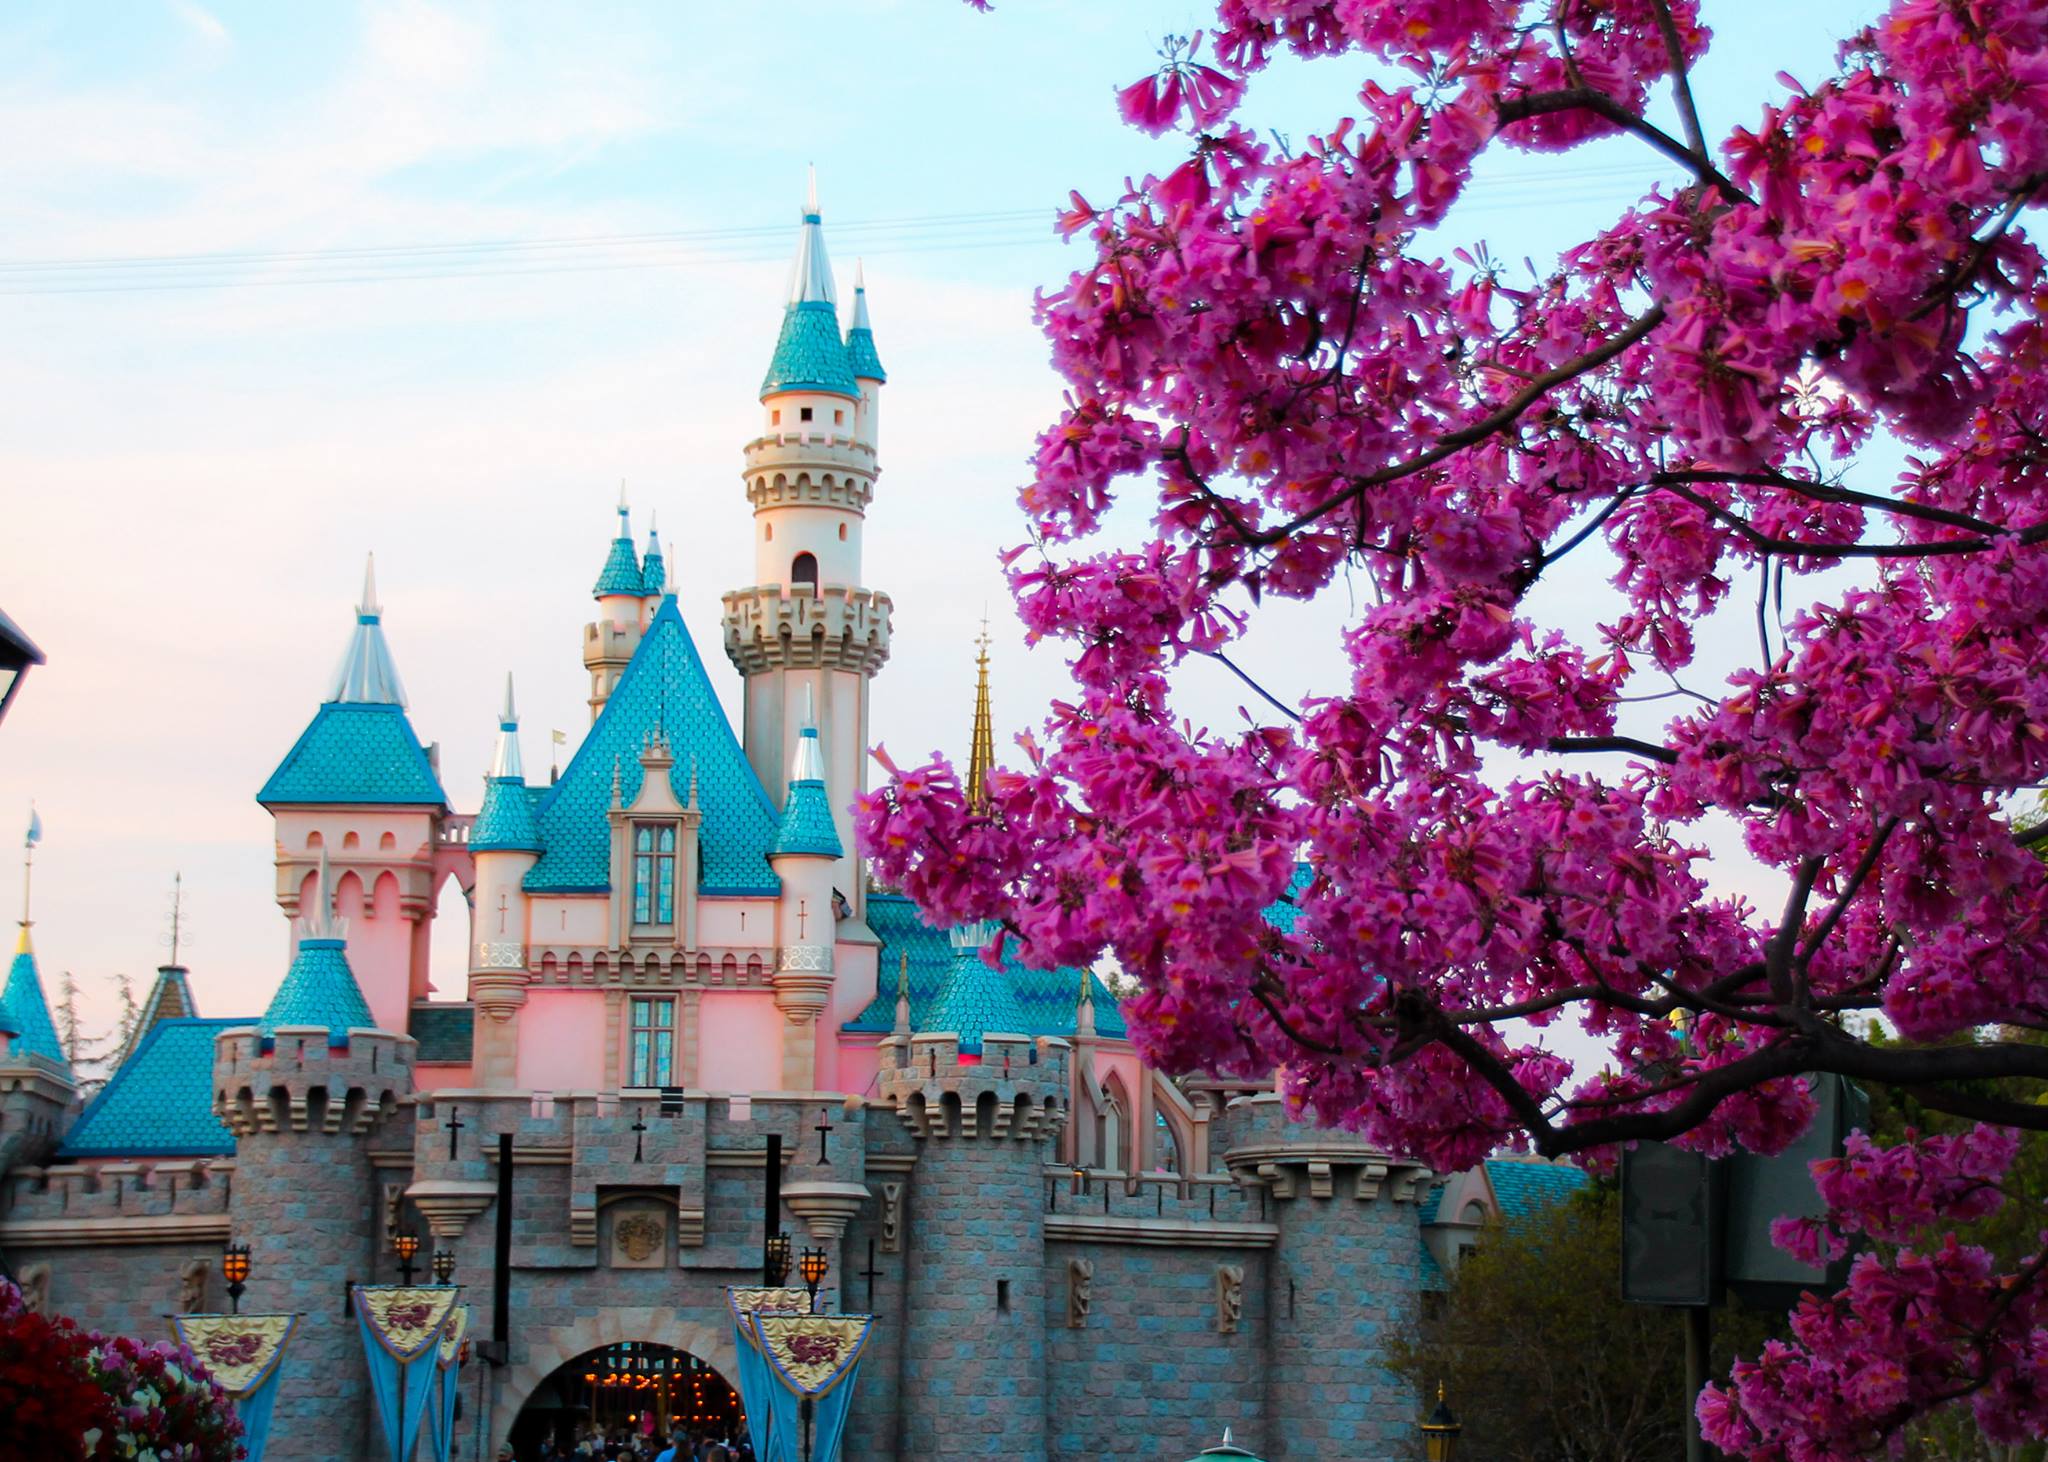 If you're looking for active vacation ideas in Southern California, Disneyland is a great way to get those steps in!!